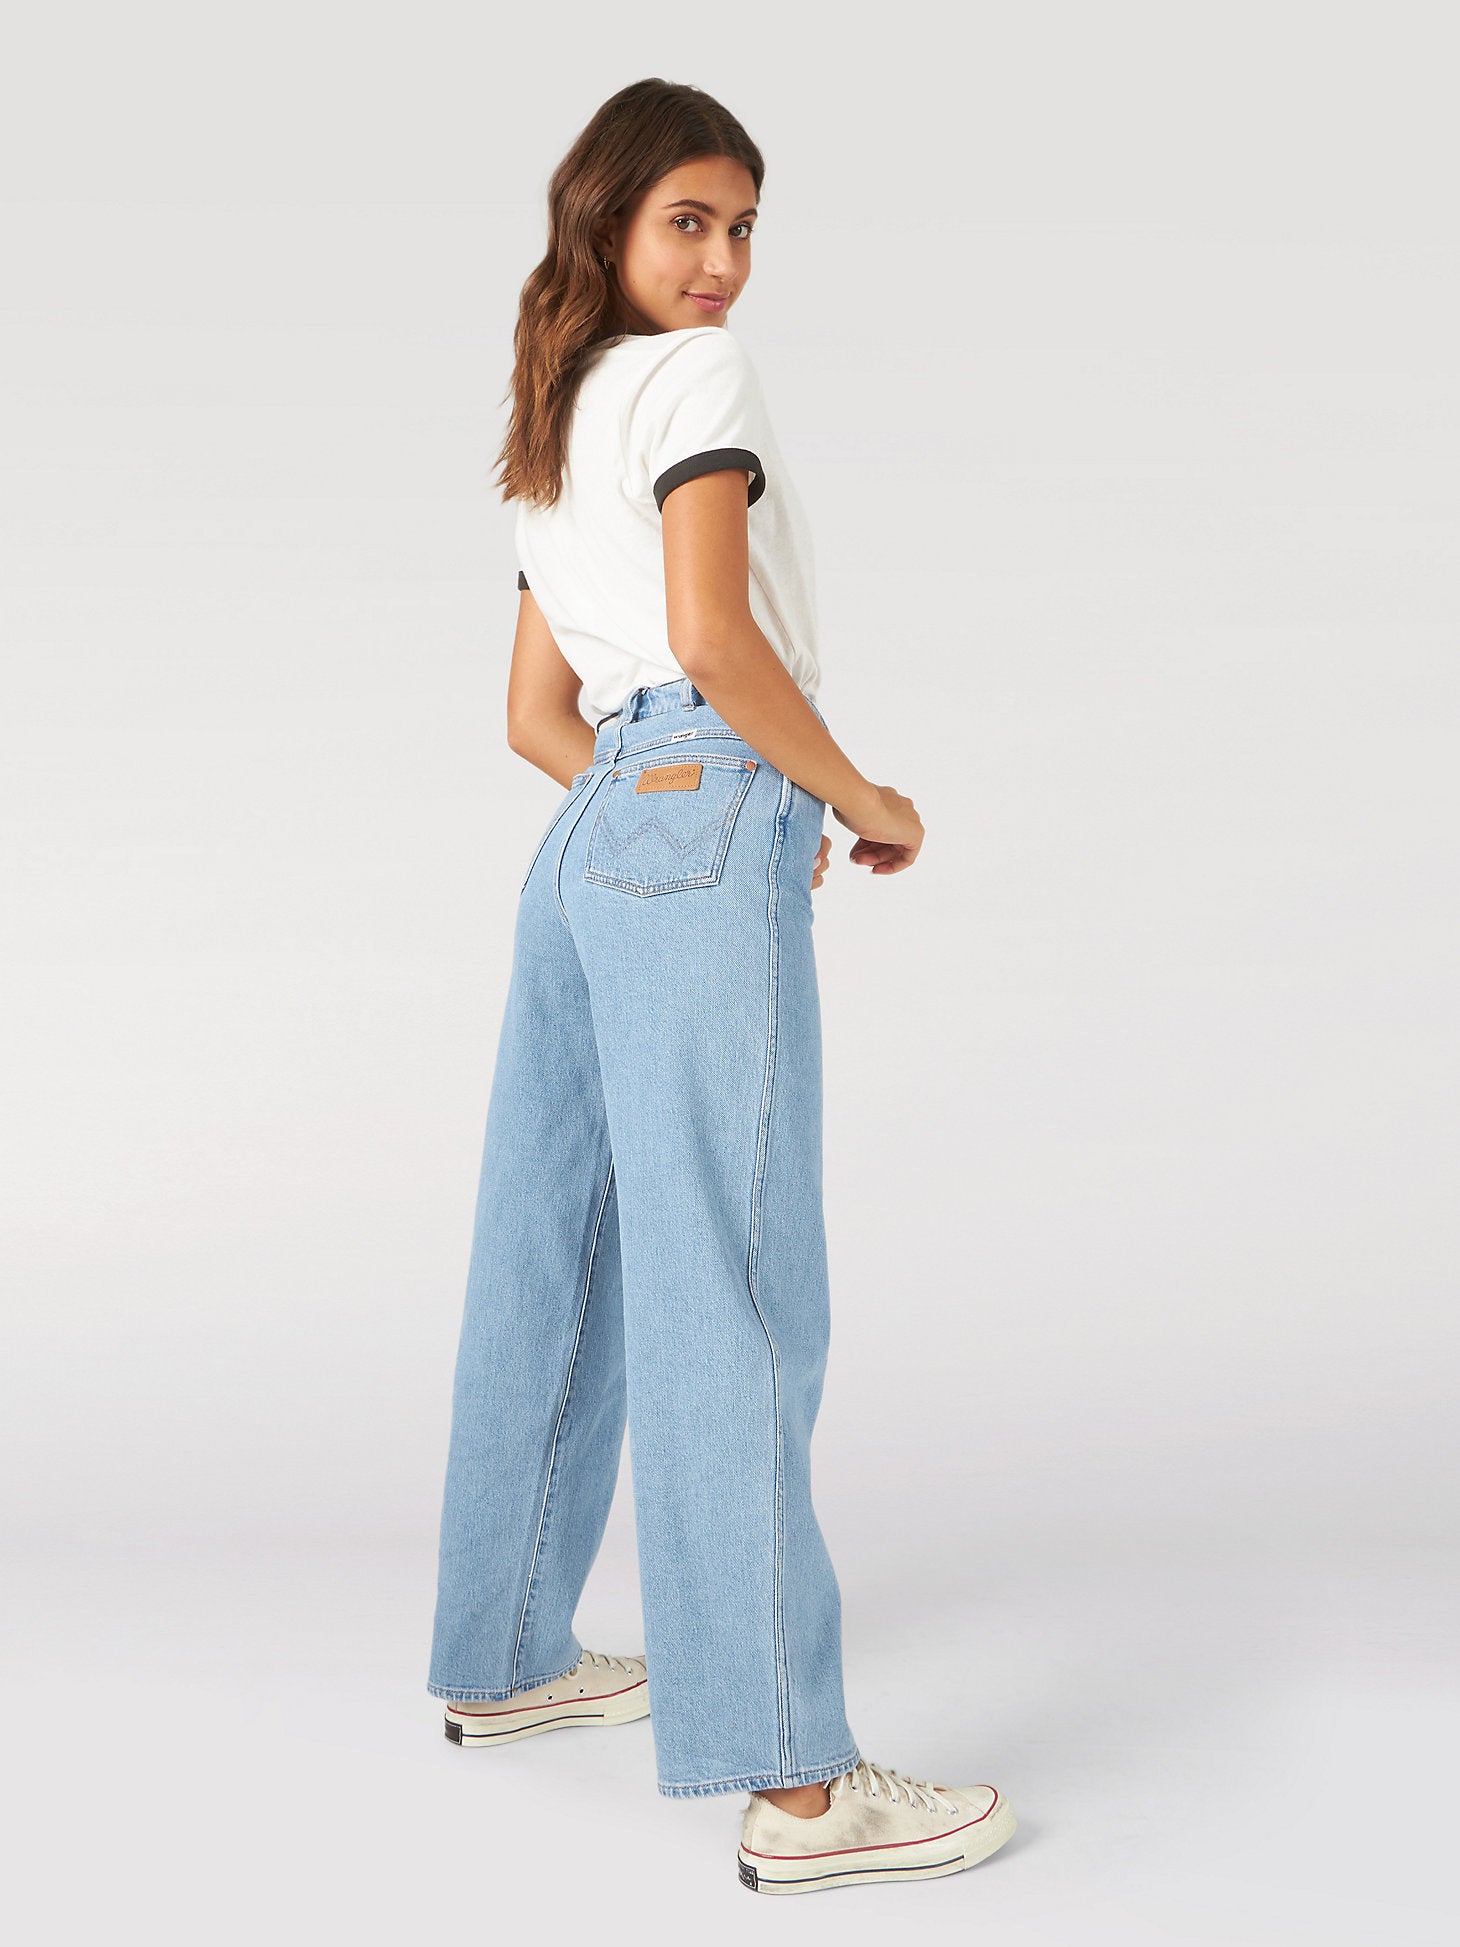 Wrangler High-Rise Tapered Barrel Jeans | Anthropologie Singapore Official  Site